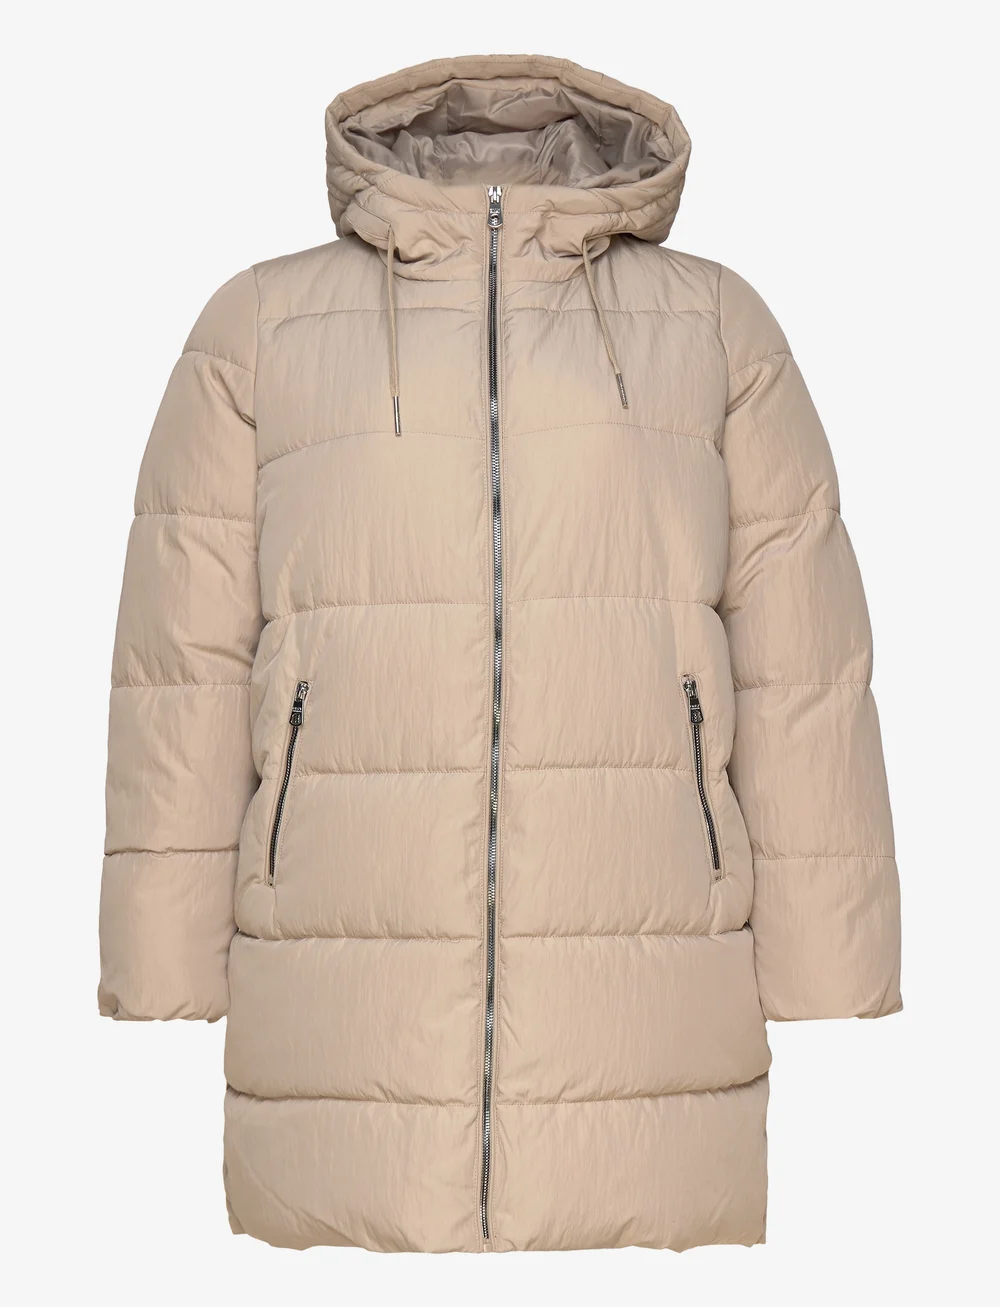 easy at - ONLY and Coat Long Otw from Buy ONLY Boozt.com. online Carmakoma Padded Carnewdolly Carmakoma Puffer €. Cc Fast returns 40.00 Coats delivery